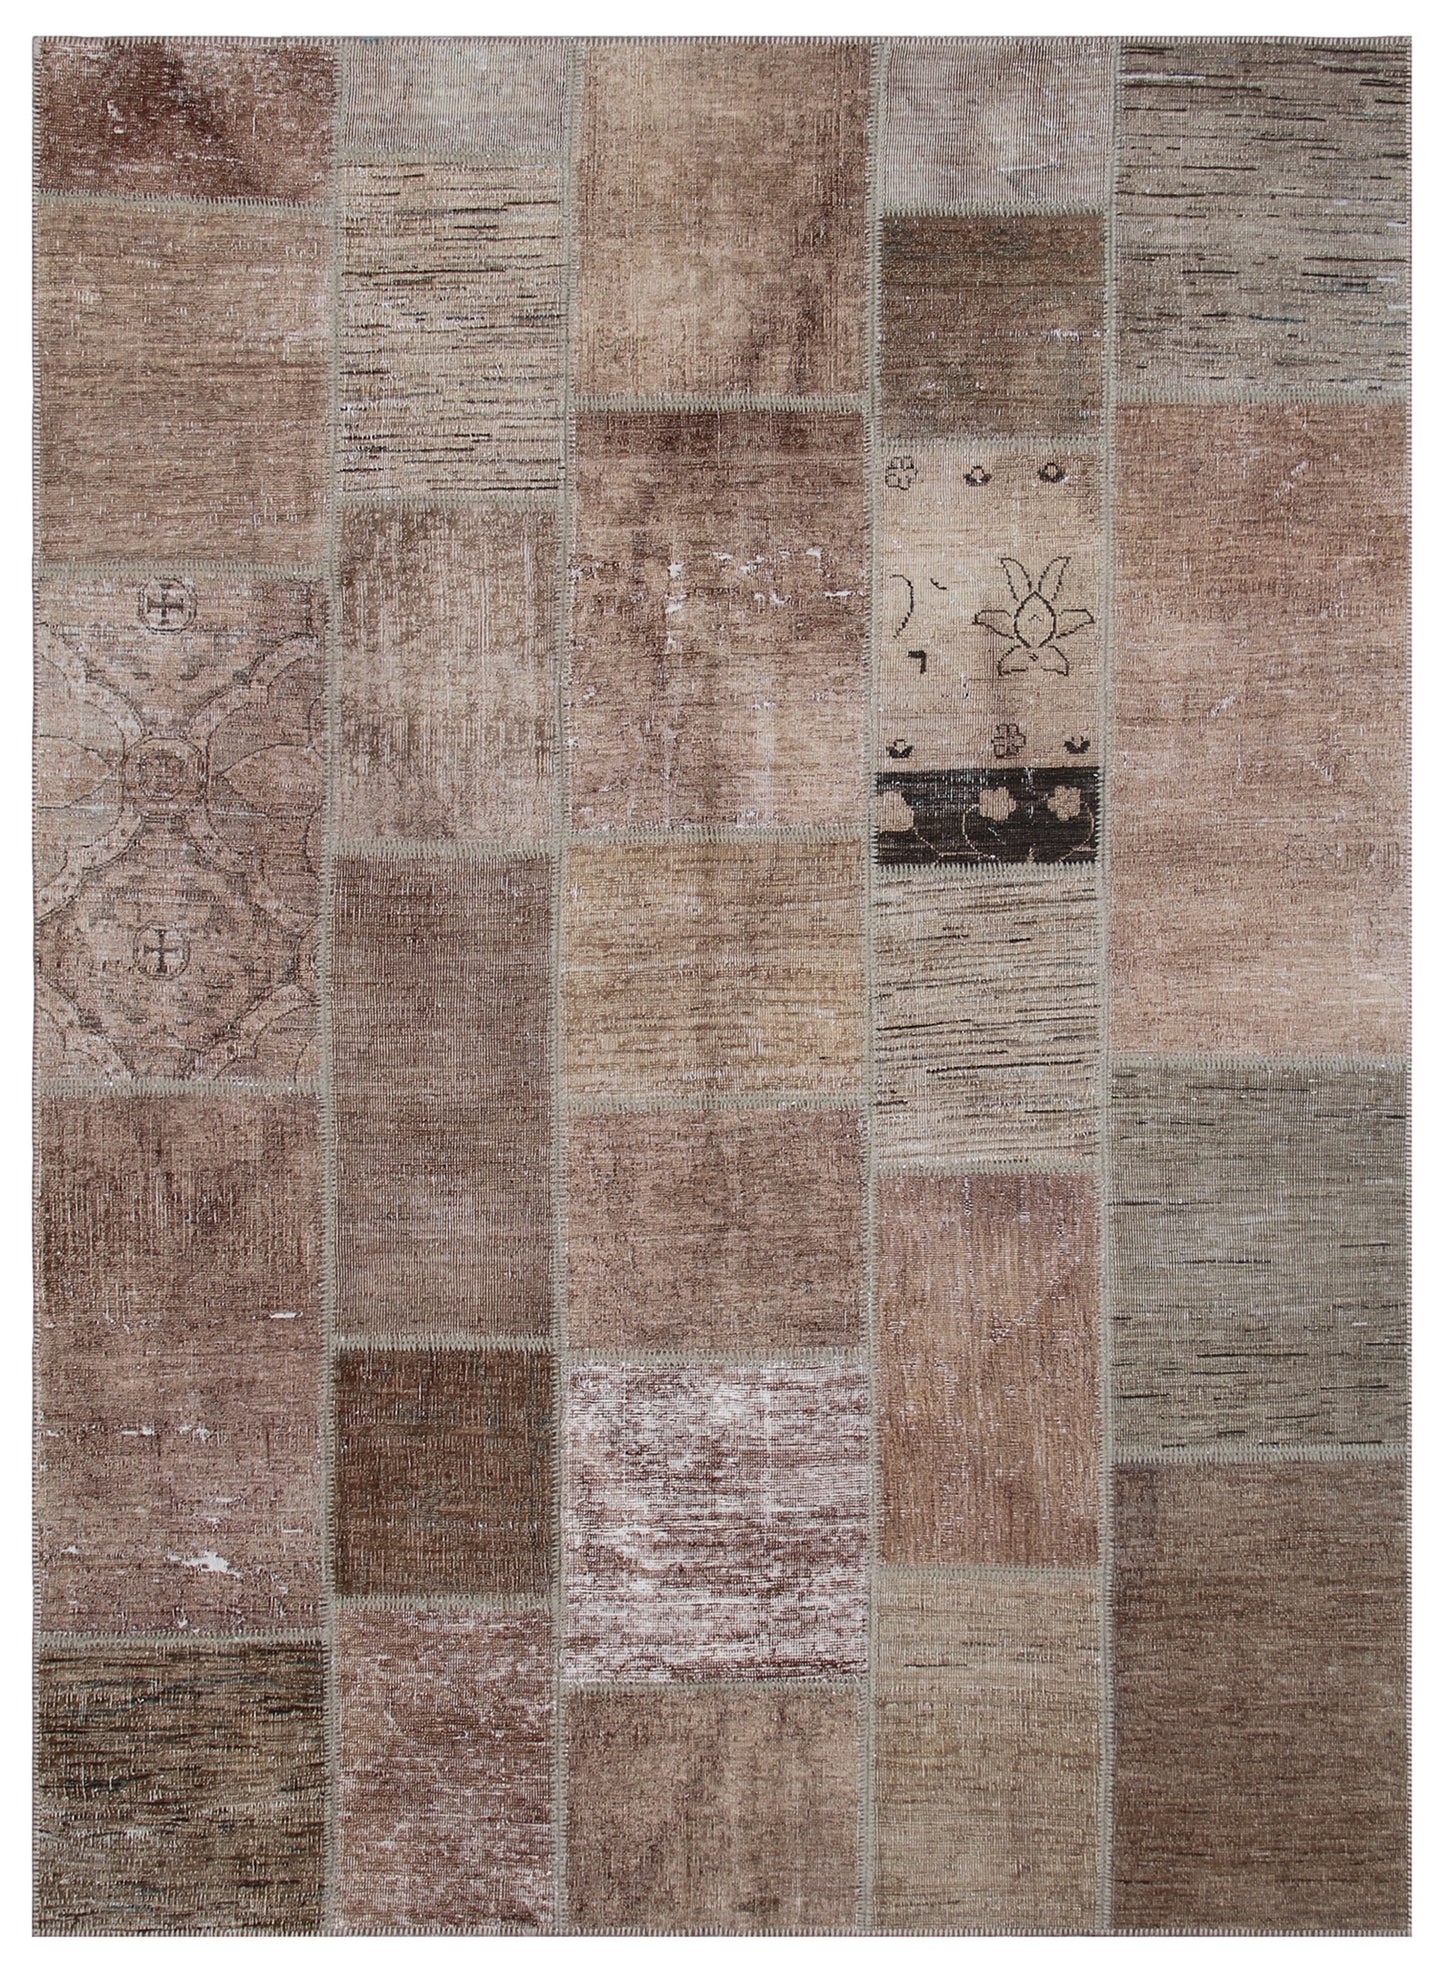 6'x8' Ariana Brown Patchwork Wool Area Rug